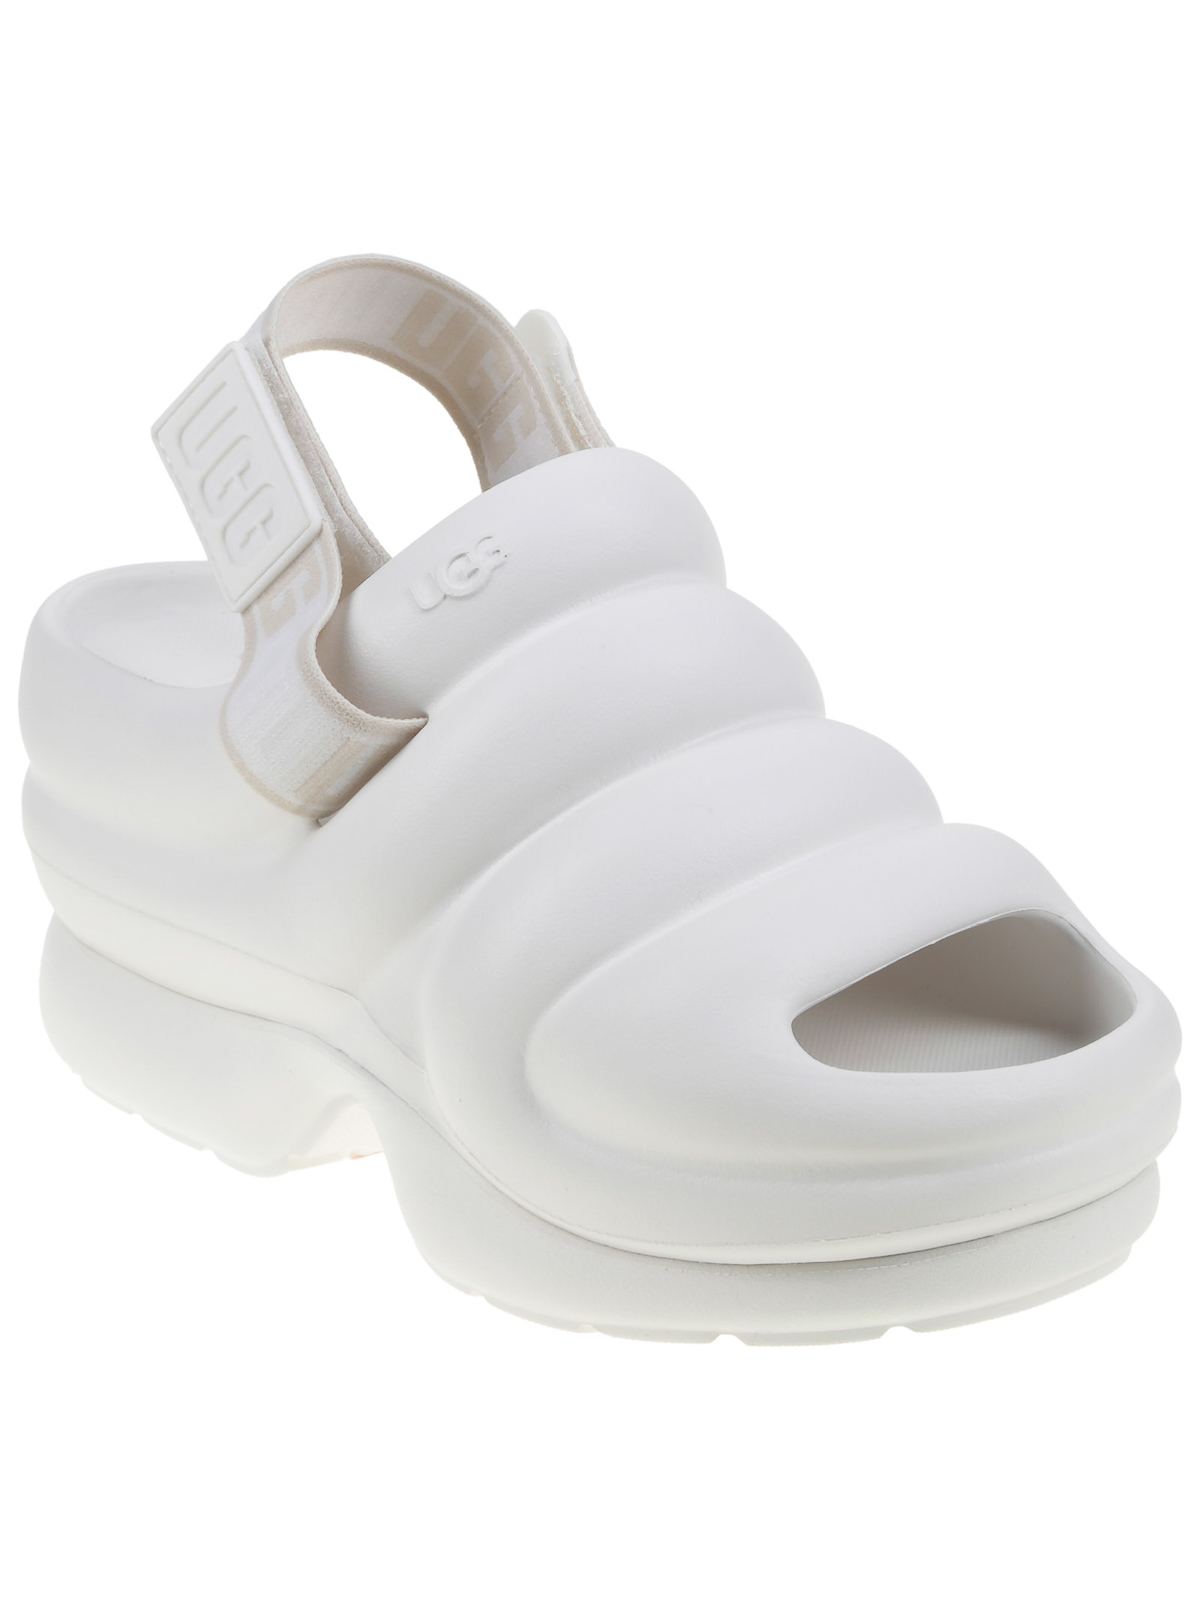 Sandals Ugg - Aww yeah - 1136762WBRIGHT | Shop online at THEBS [iKRIX]